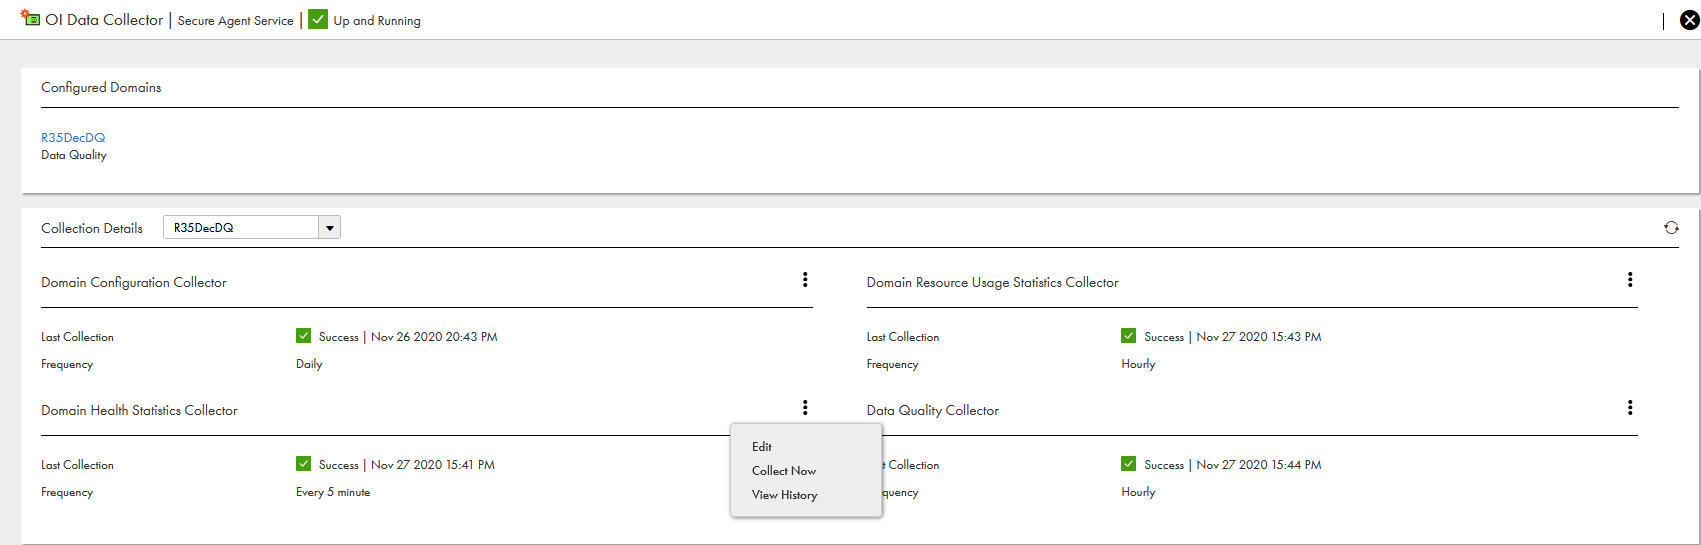 In the image, you can view the collection details for the selected OI Data Collector service. 
				  